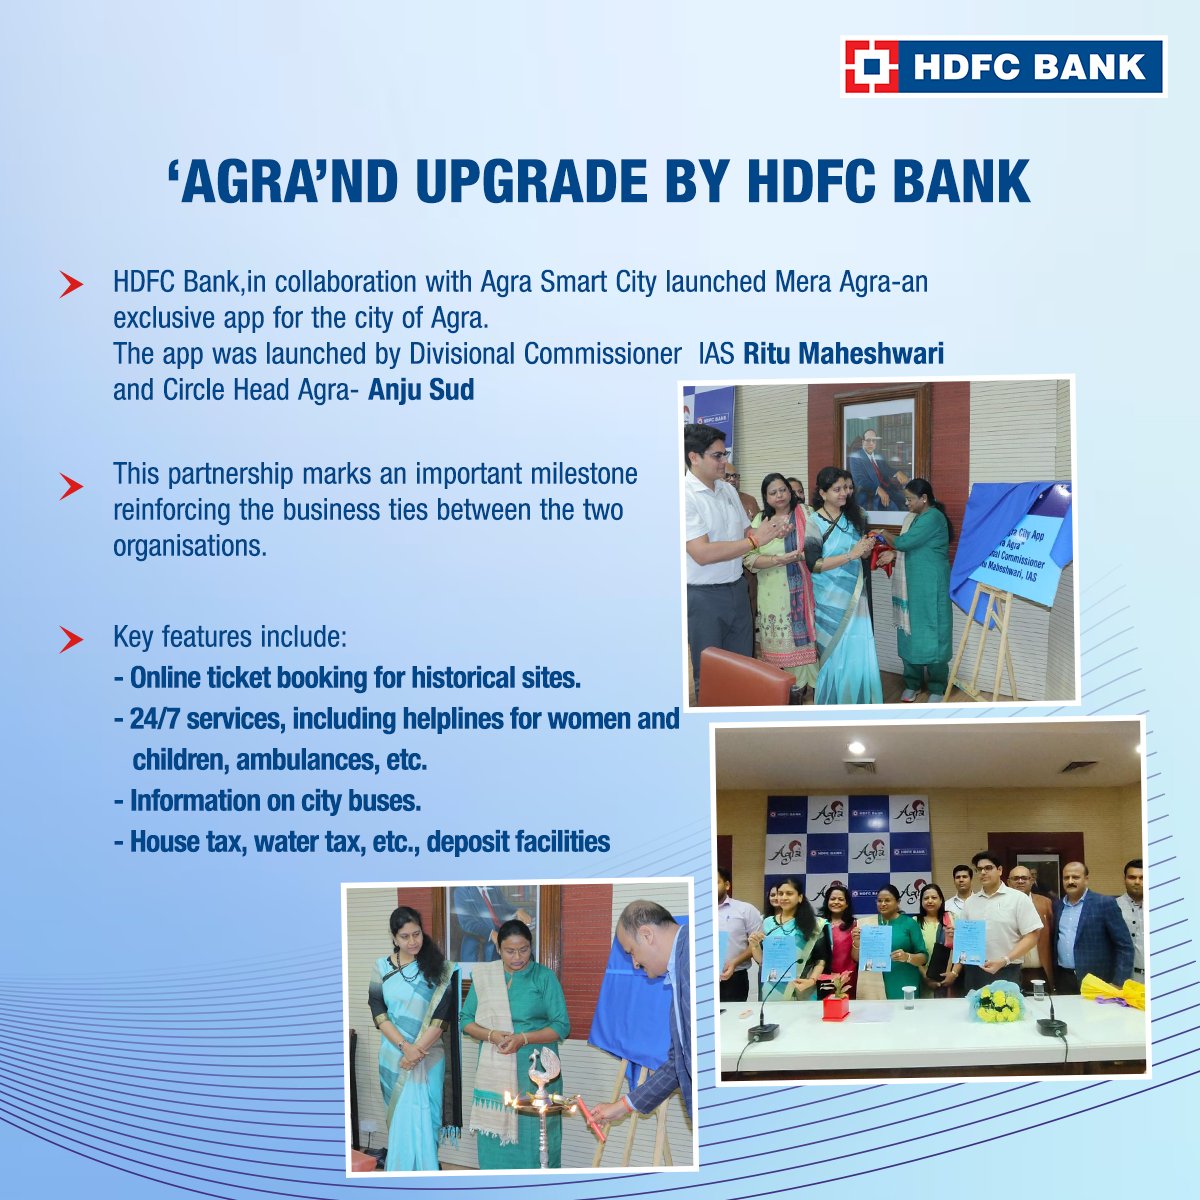 .@HDFC_Bank , in collaboration with Agra Smart City, launched Mera Agra - an exclusive app for the city of Agra. Read below to know more. #HDFCBank #News #MeraAgra #AppLaunch #agra #Upgrade #ExclusiveApp